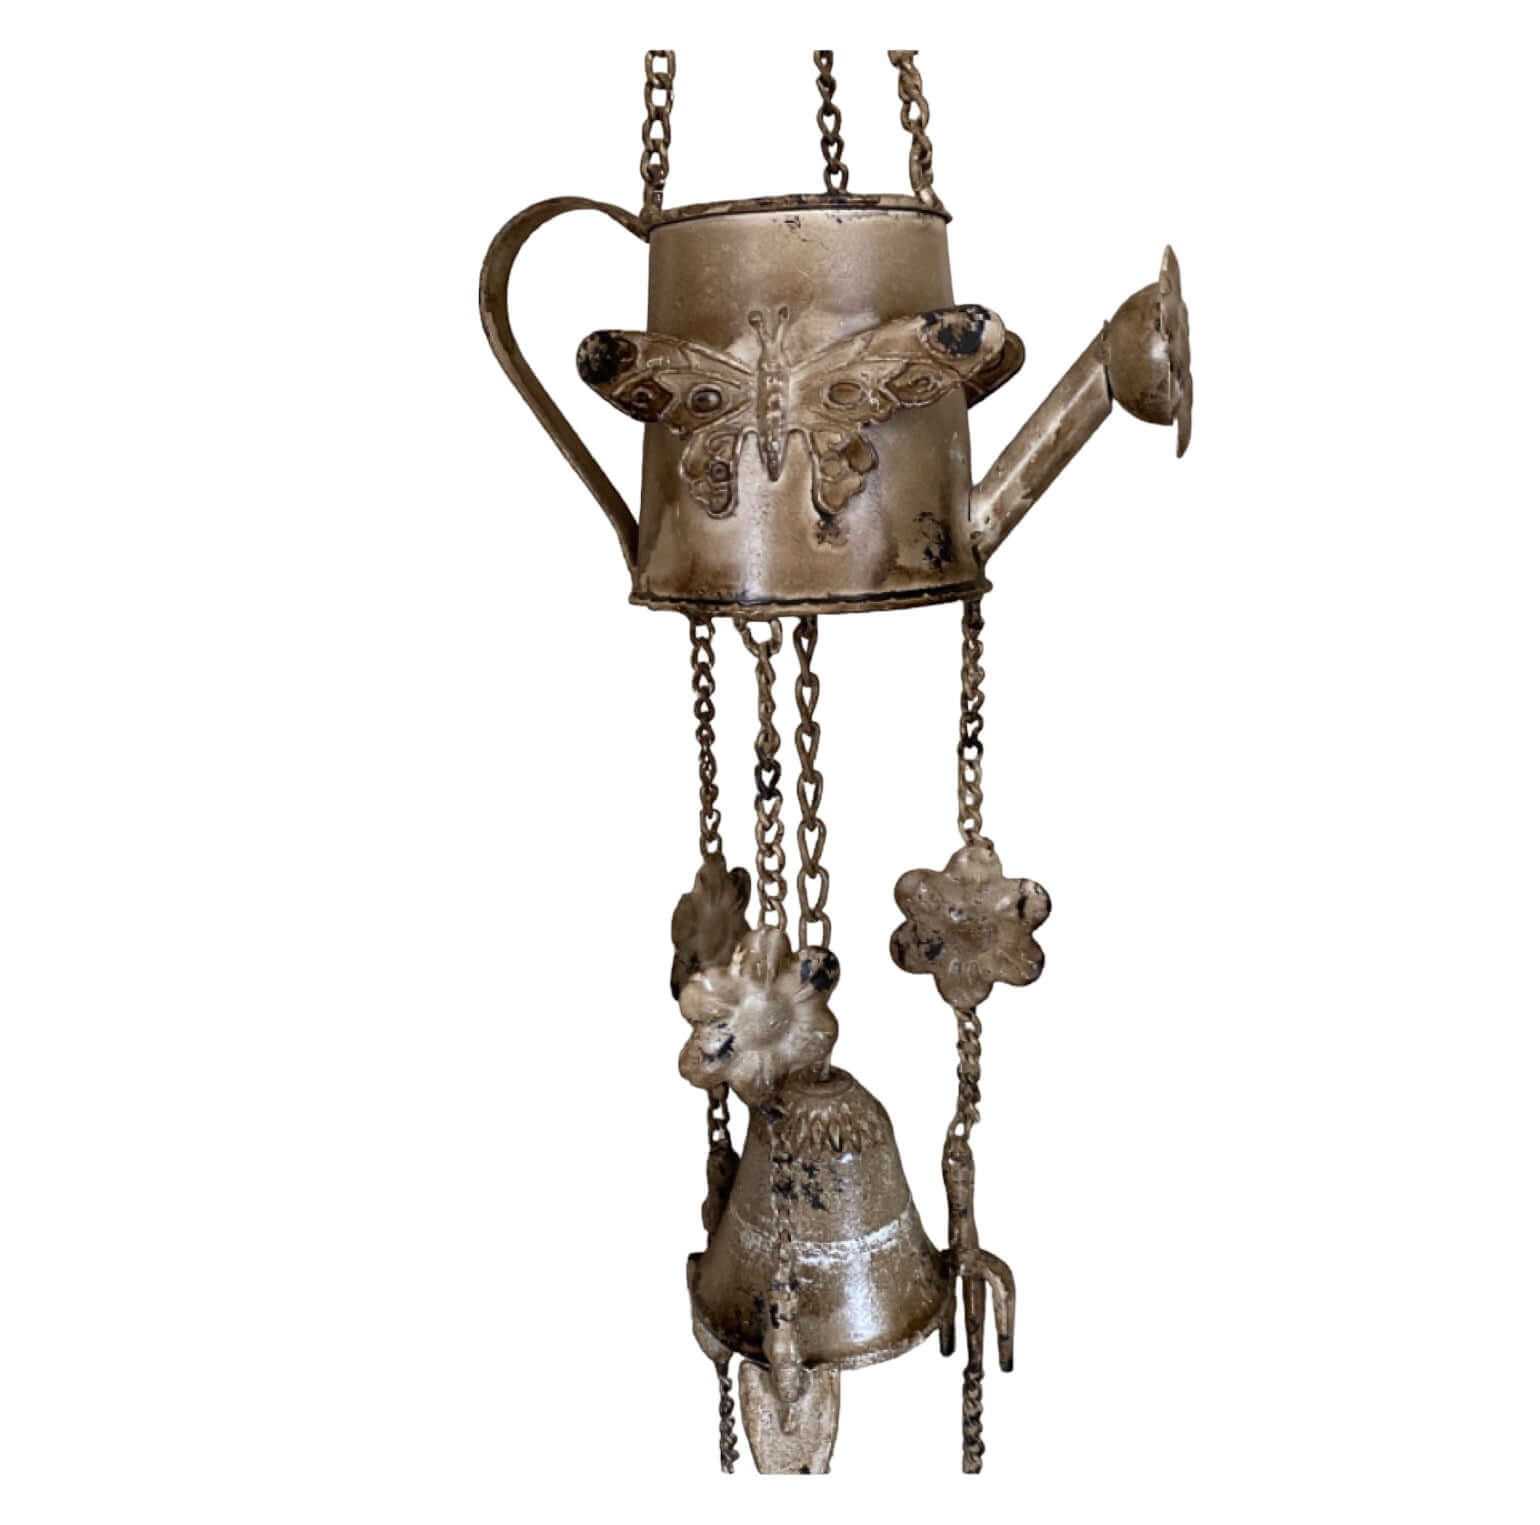 Bell Chime Watering Can Butterfly Garden - The Renmy Store Homewares & Gifts 